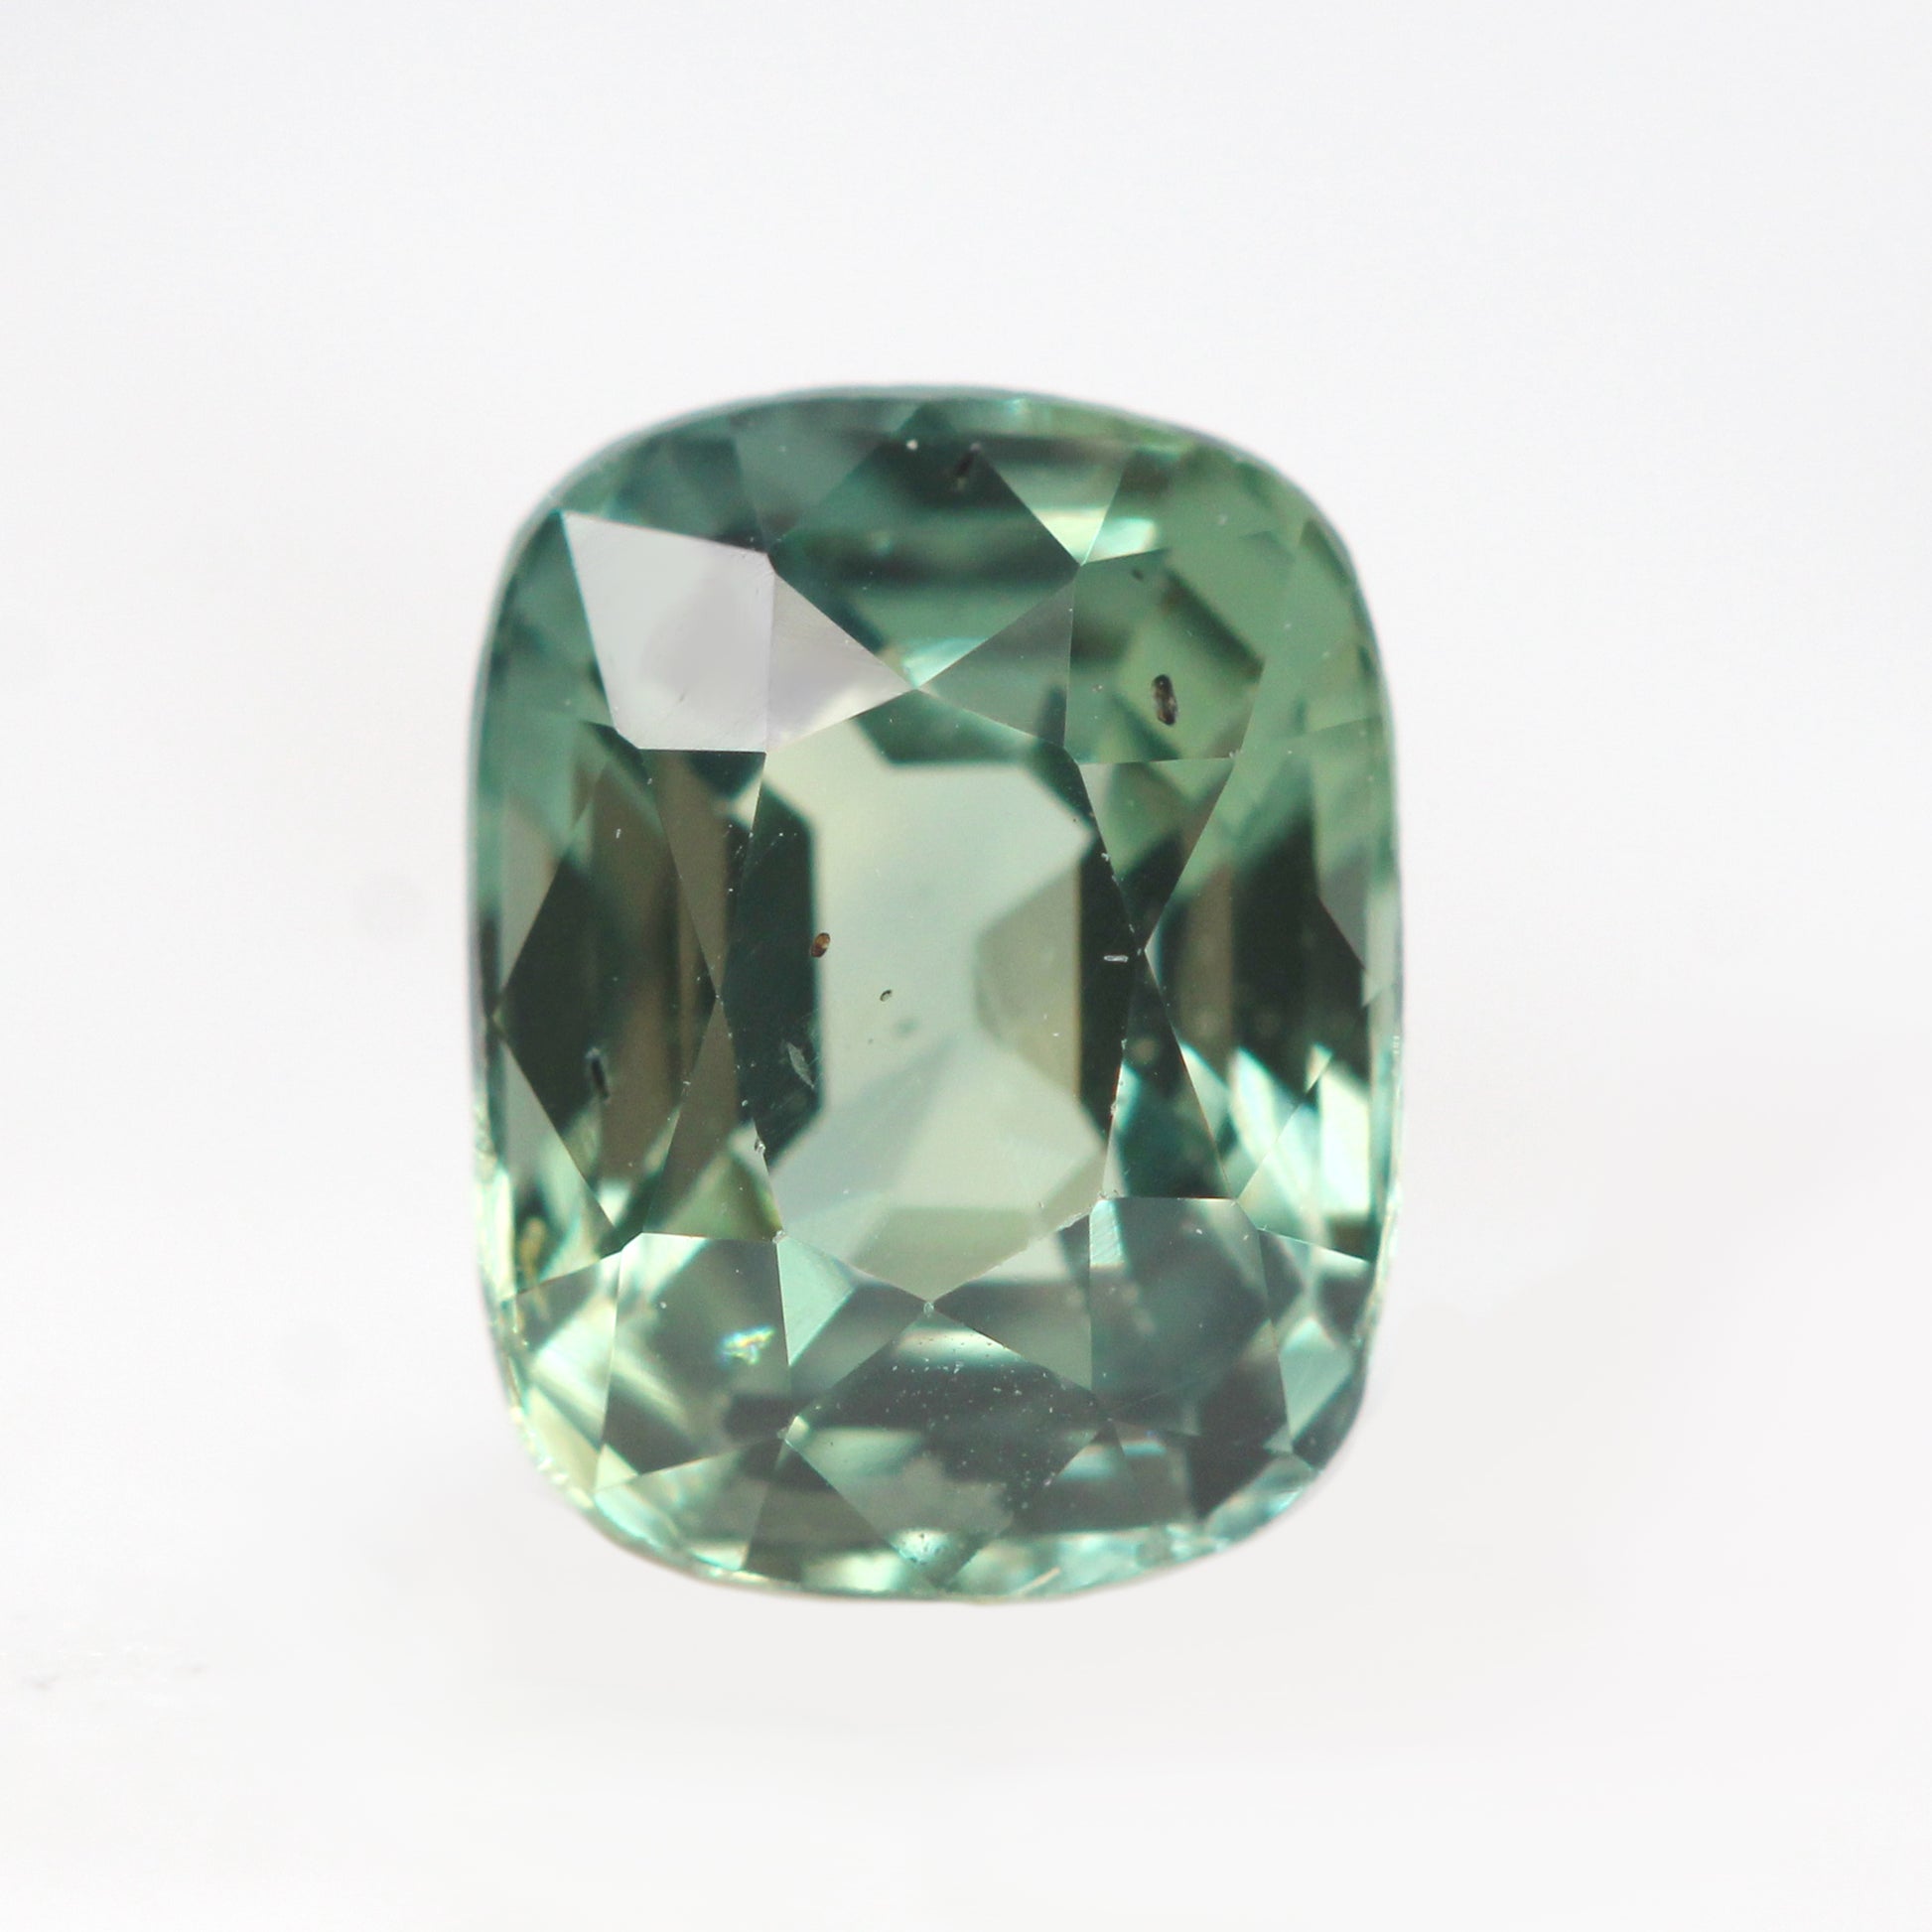 1.09 Carat Light Teal Green Cushion Cut Sapphire for Custom Work - Inventory Code TGCS109 - Midwinter Co. Alternative Bridal Rings and Modern Fine Jewelry